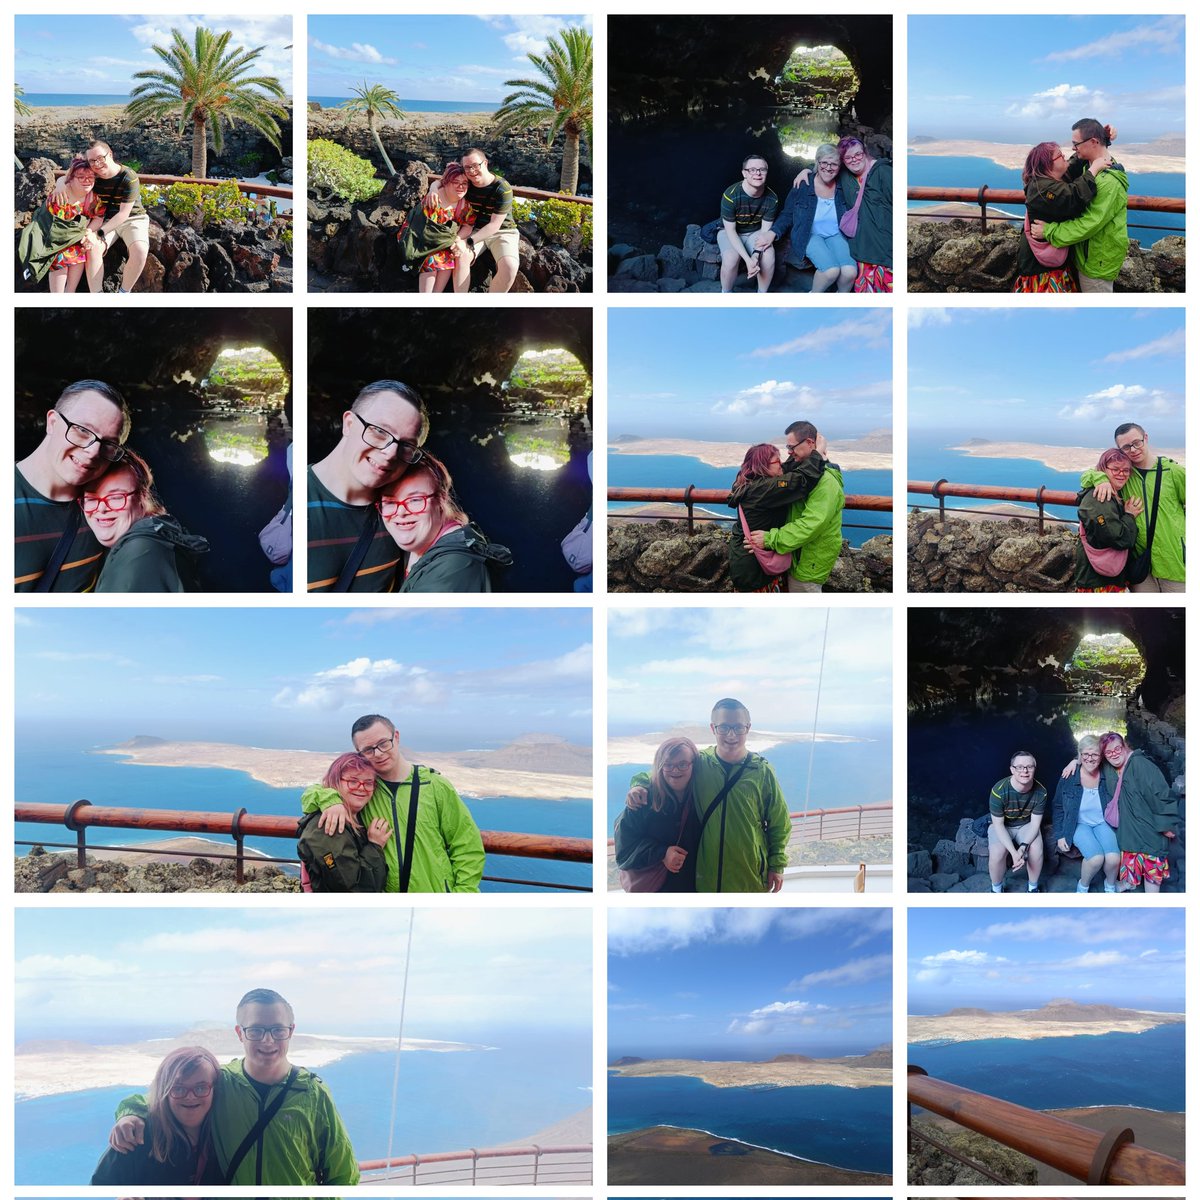 We are in Lanzarote and we are staying at Club la santa apartments our hotel and we all went on a day out to the island of Lanzarote with Suzie, Finlay, Heidi, Liz and myself we had a fun day.